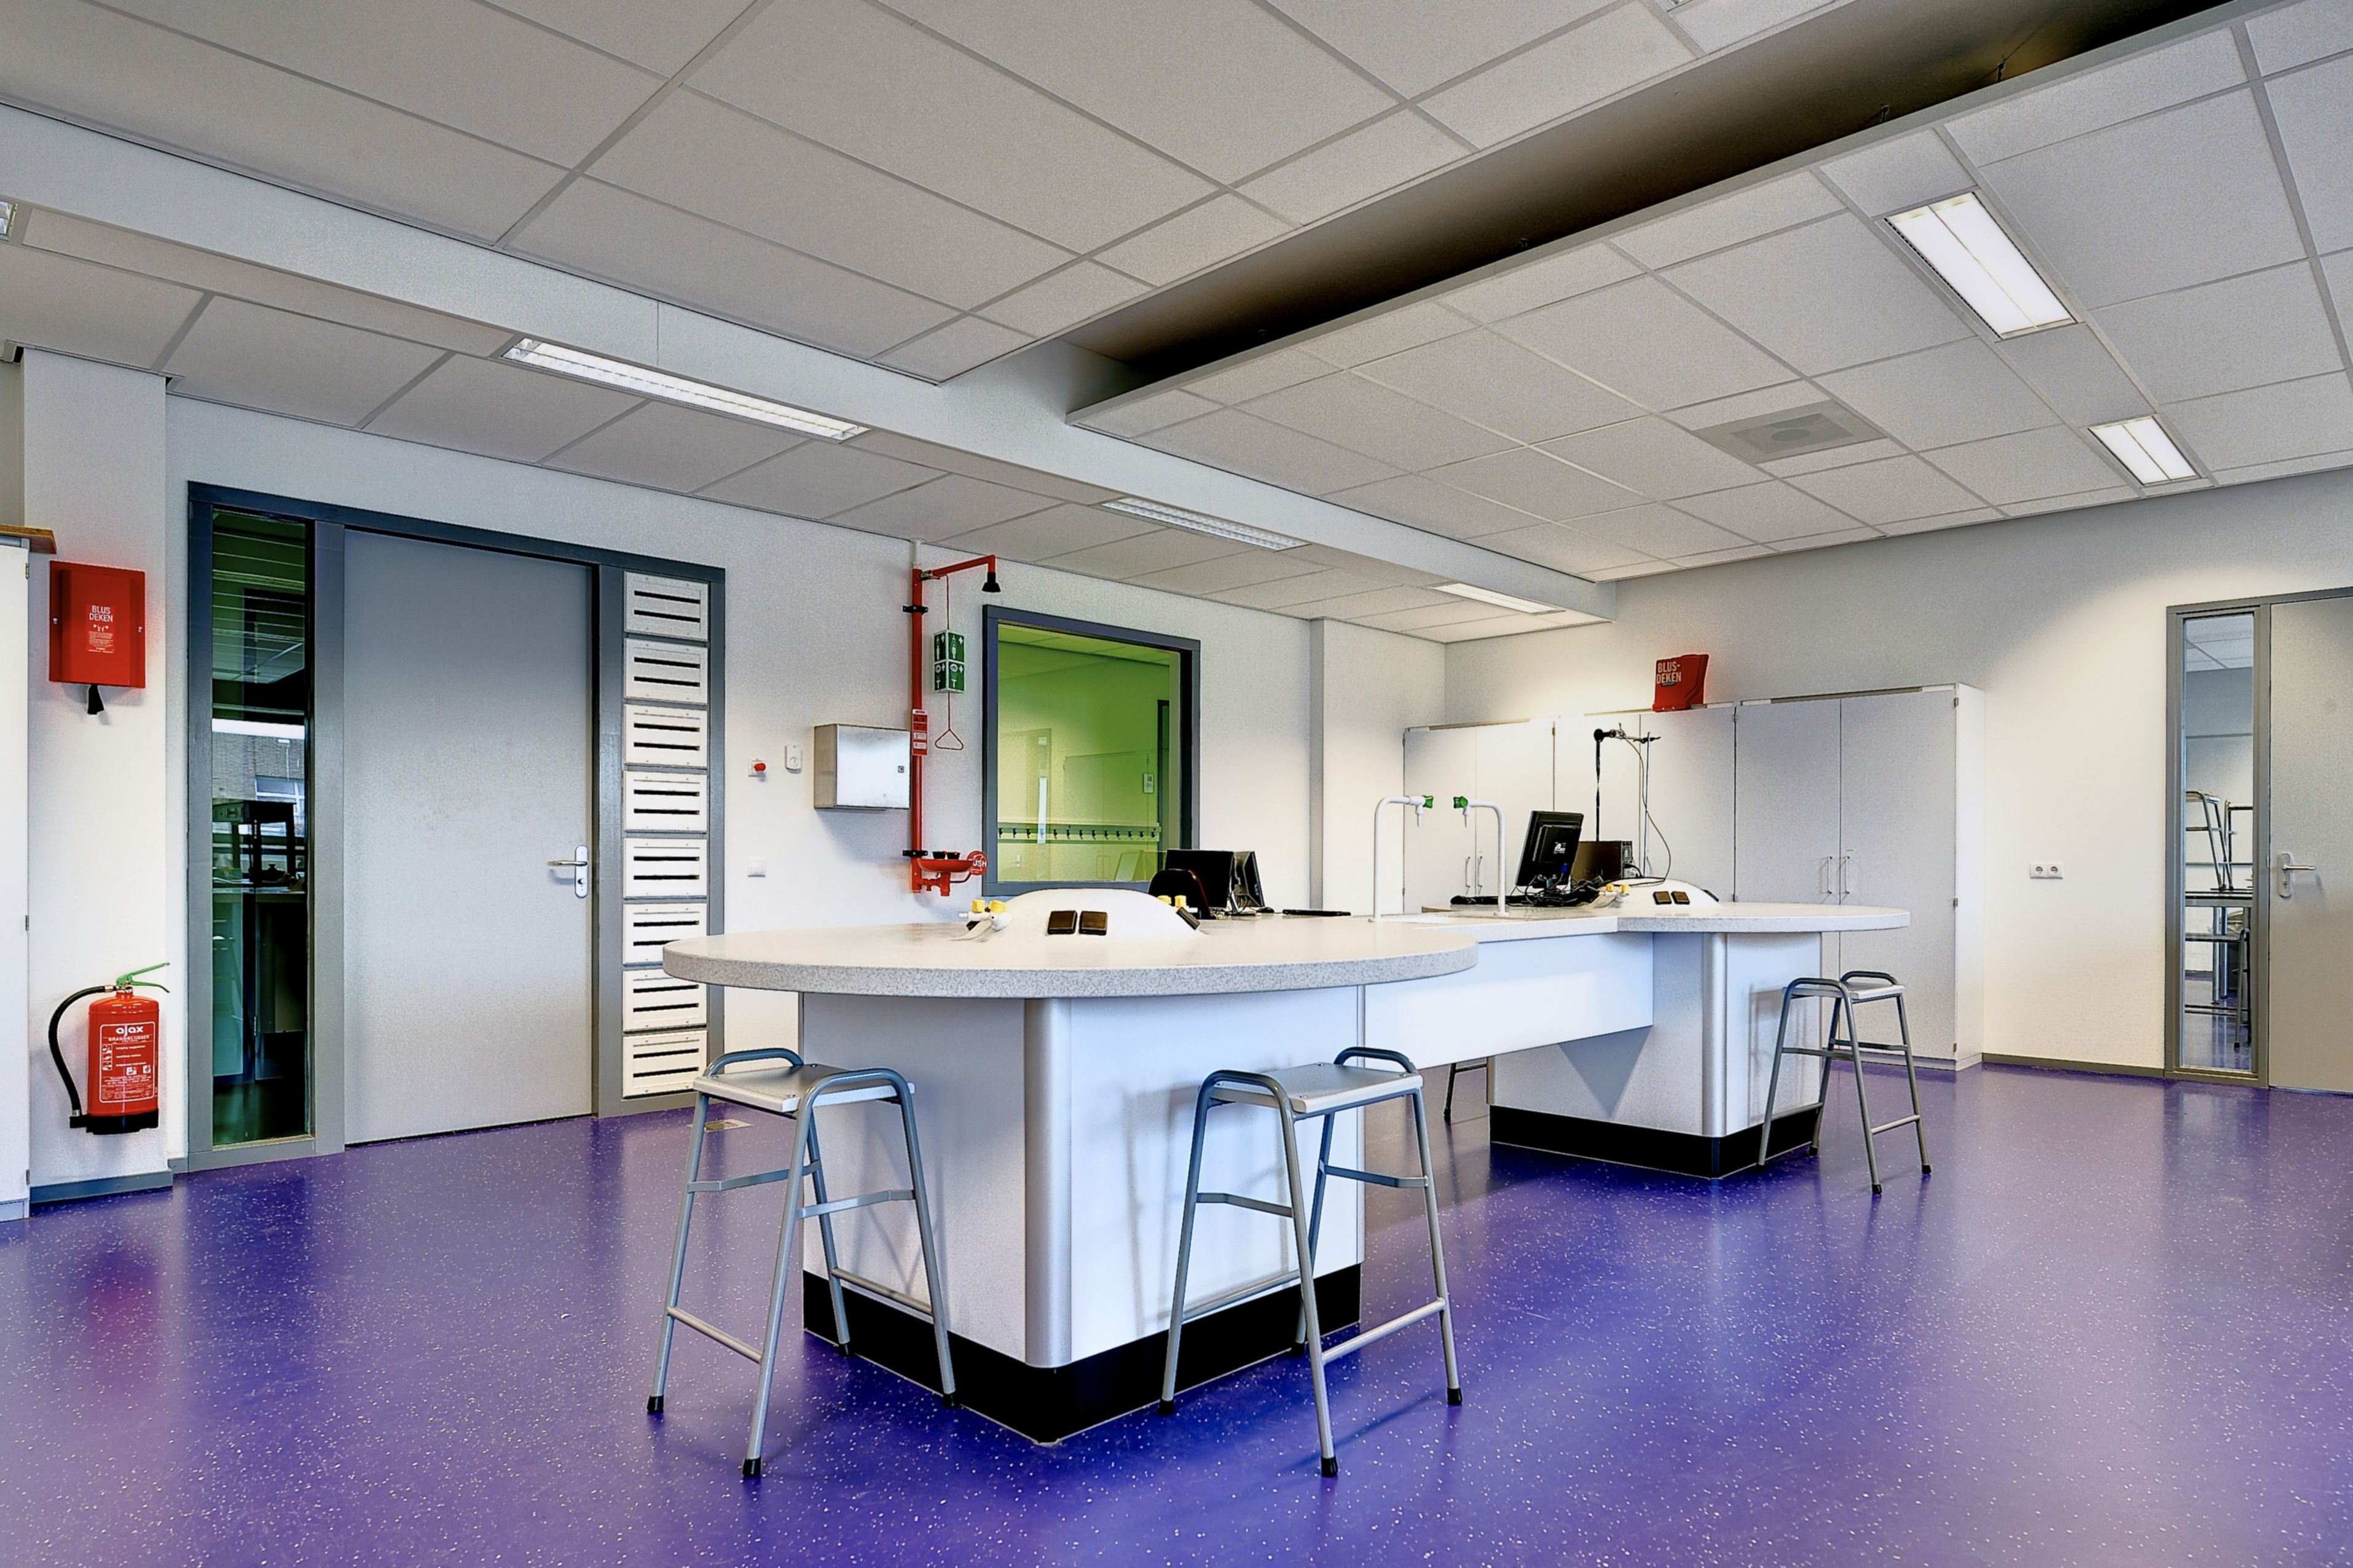 Colorful decorative floor made with Sika ComfortFloor system in Revius Lyceum School in Netherlands